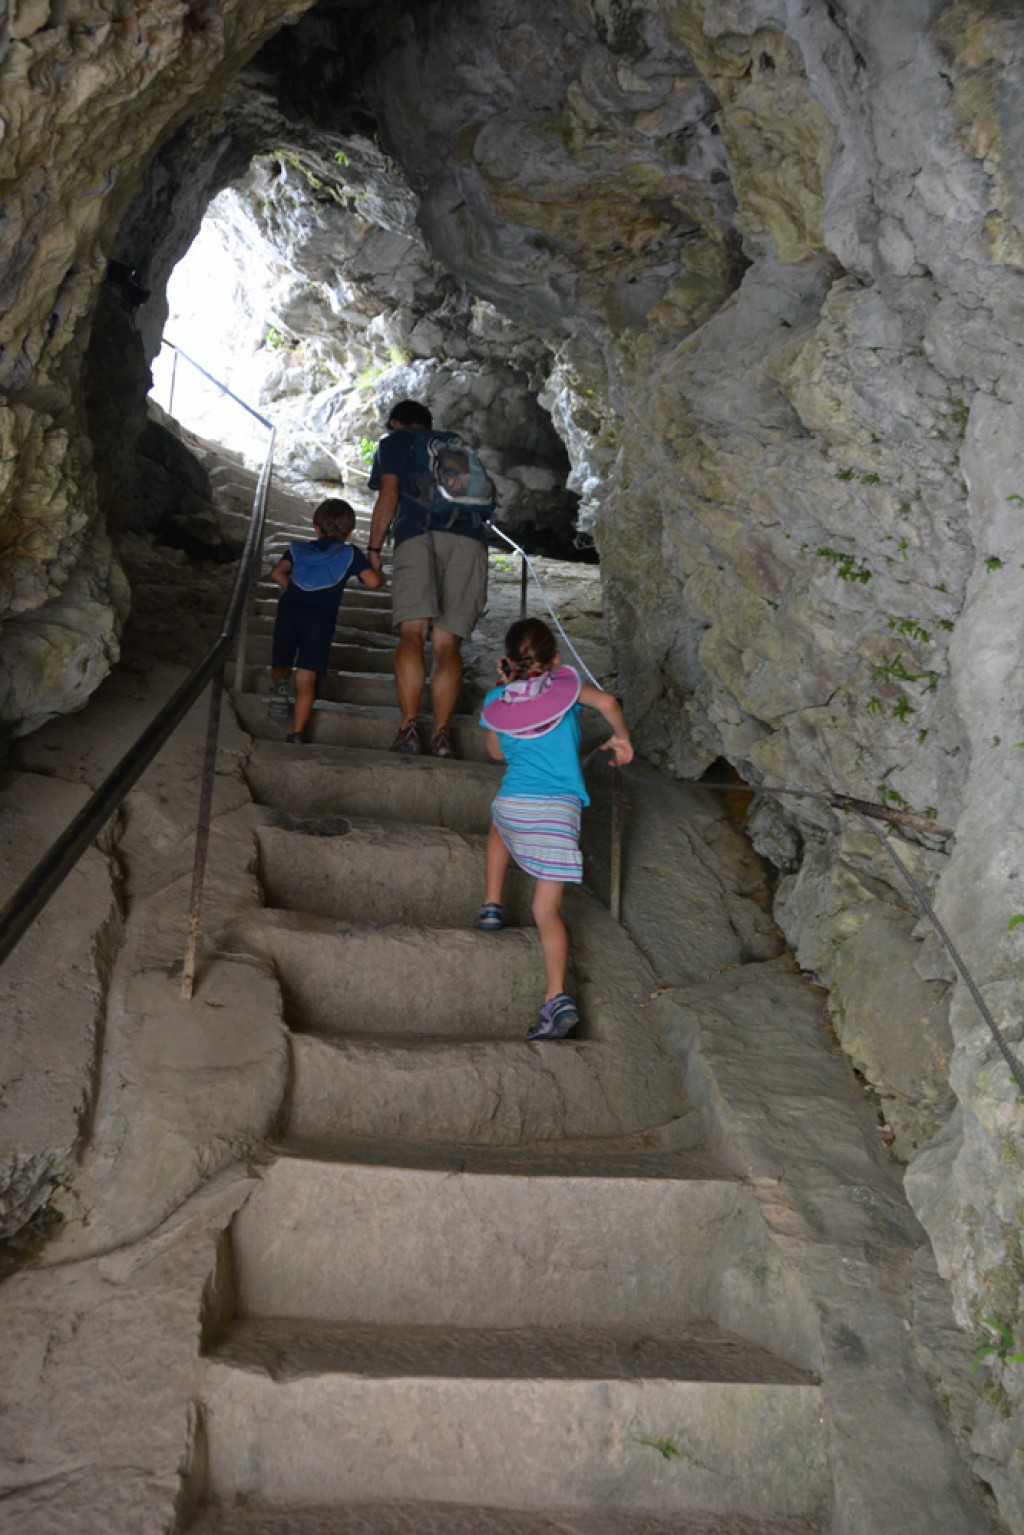 Predjama Castle is a castle built into a cave. It is an awesome place to explore with kids, lots of rooms to explore, all built in to a cave that can be explored. 